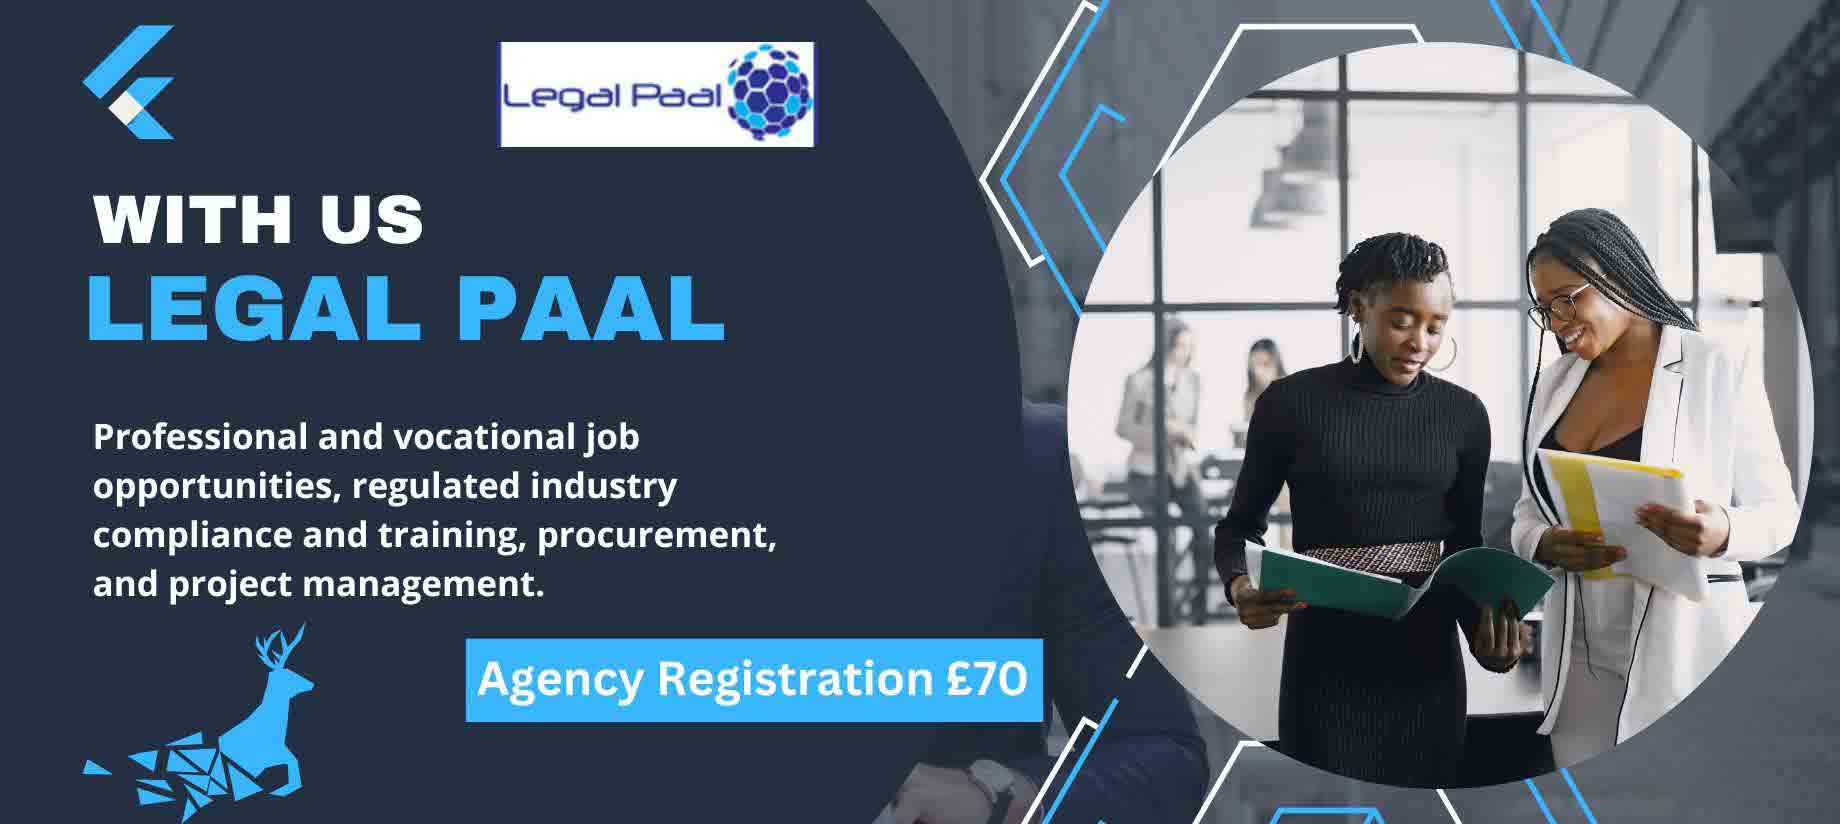 Agency Registration £70 - Banner Image on Legal Paal